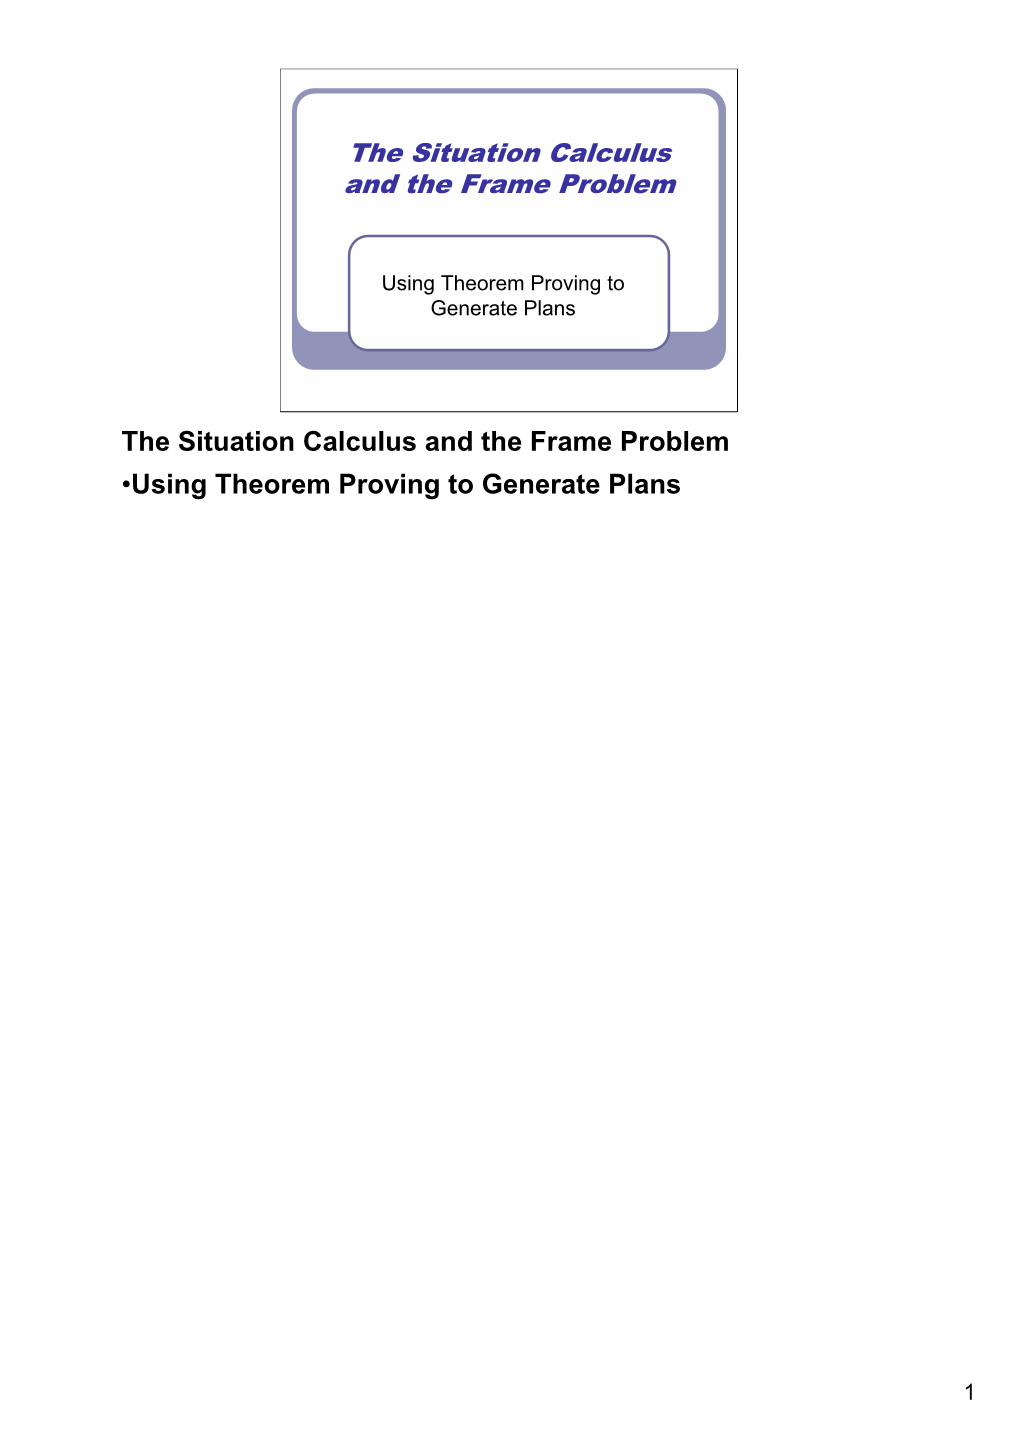 The Situation Calculus and the Frame Problem the Situation Calculus and the Frame Problem •Using Theorem Proving to Generate P